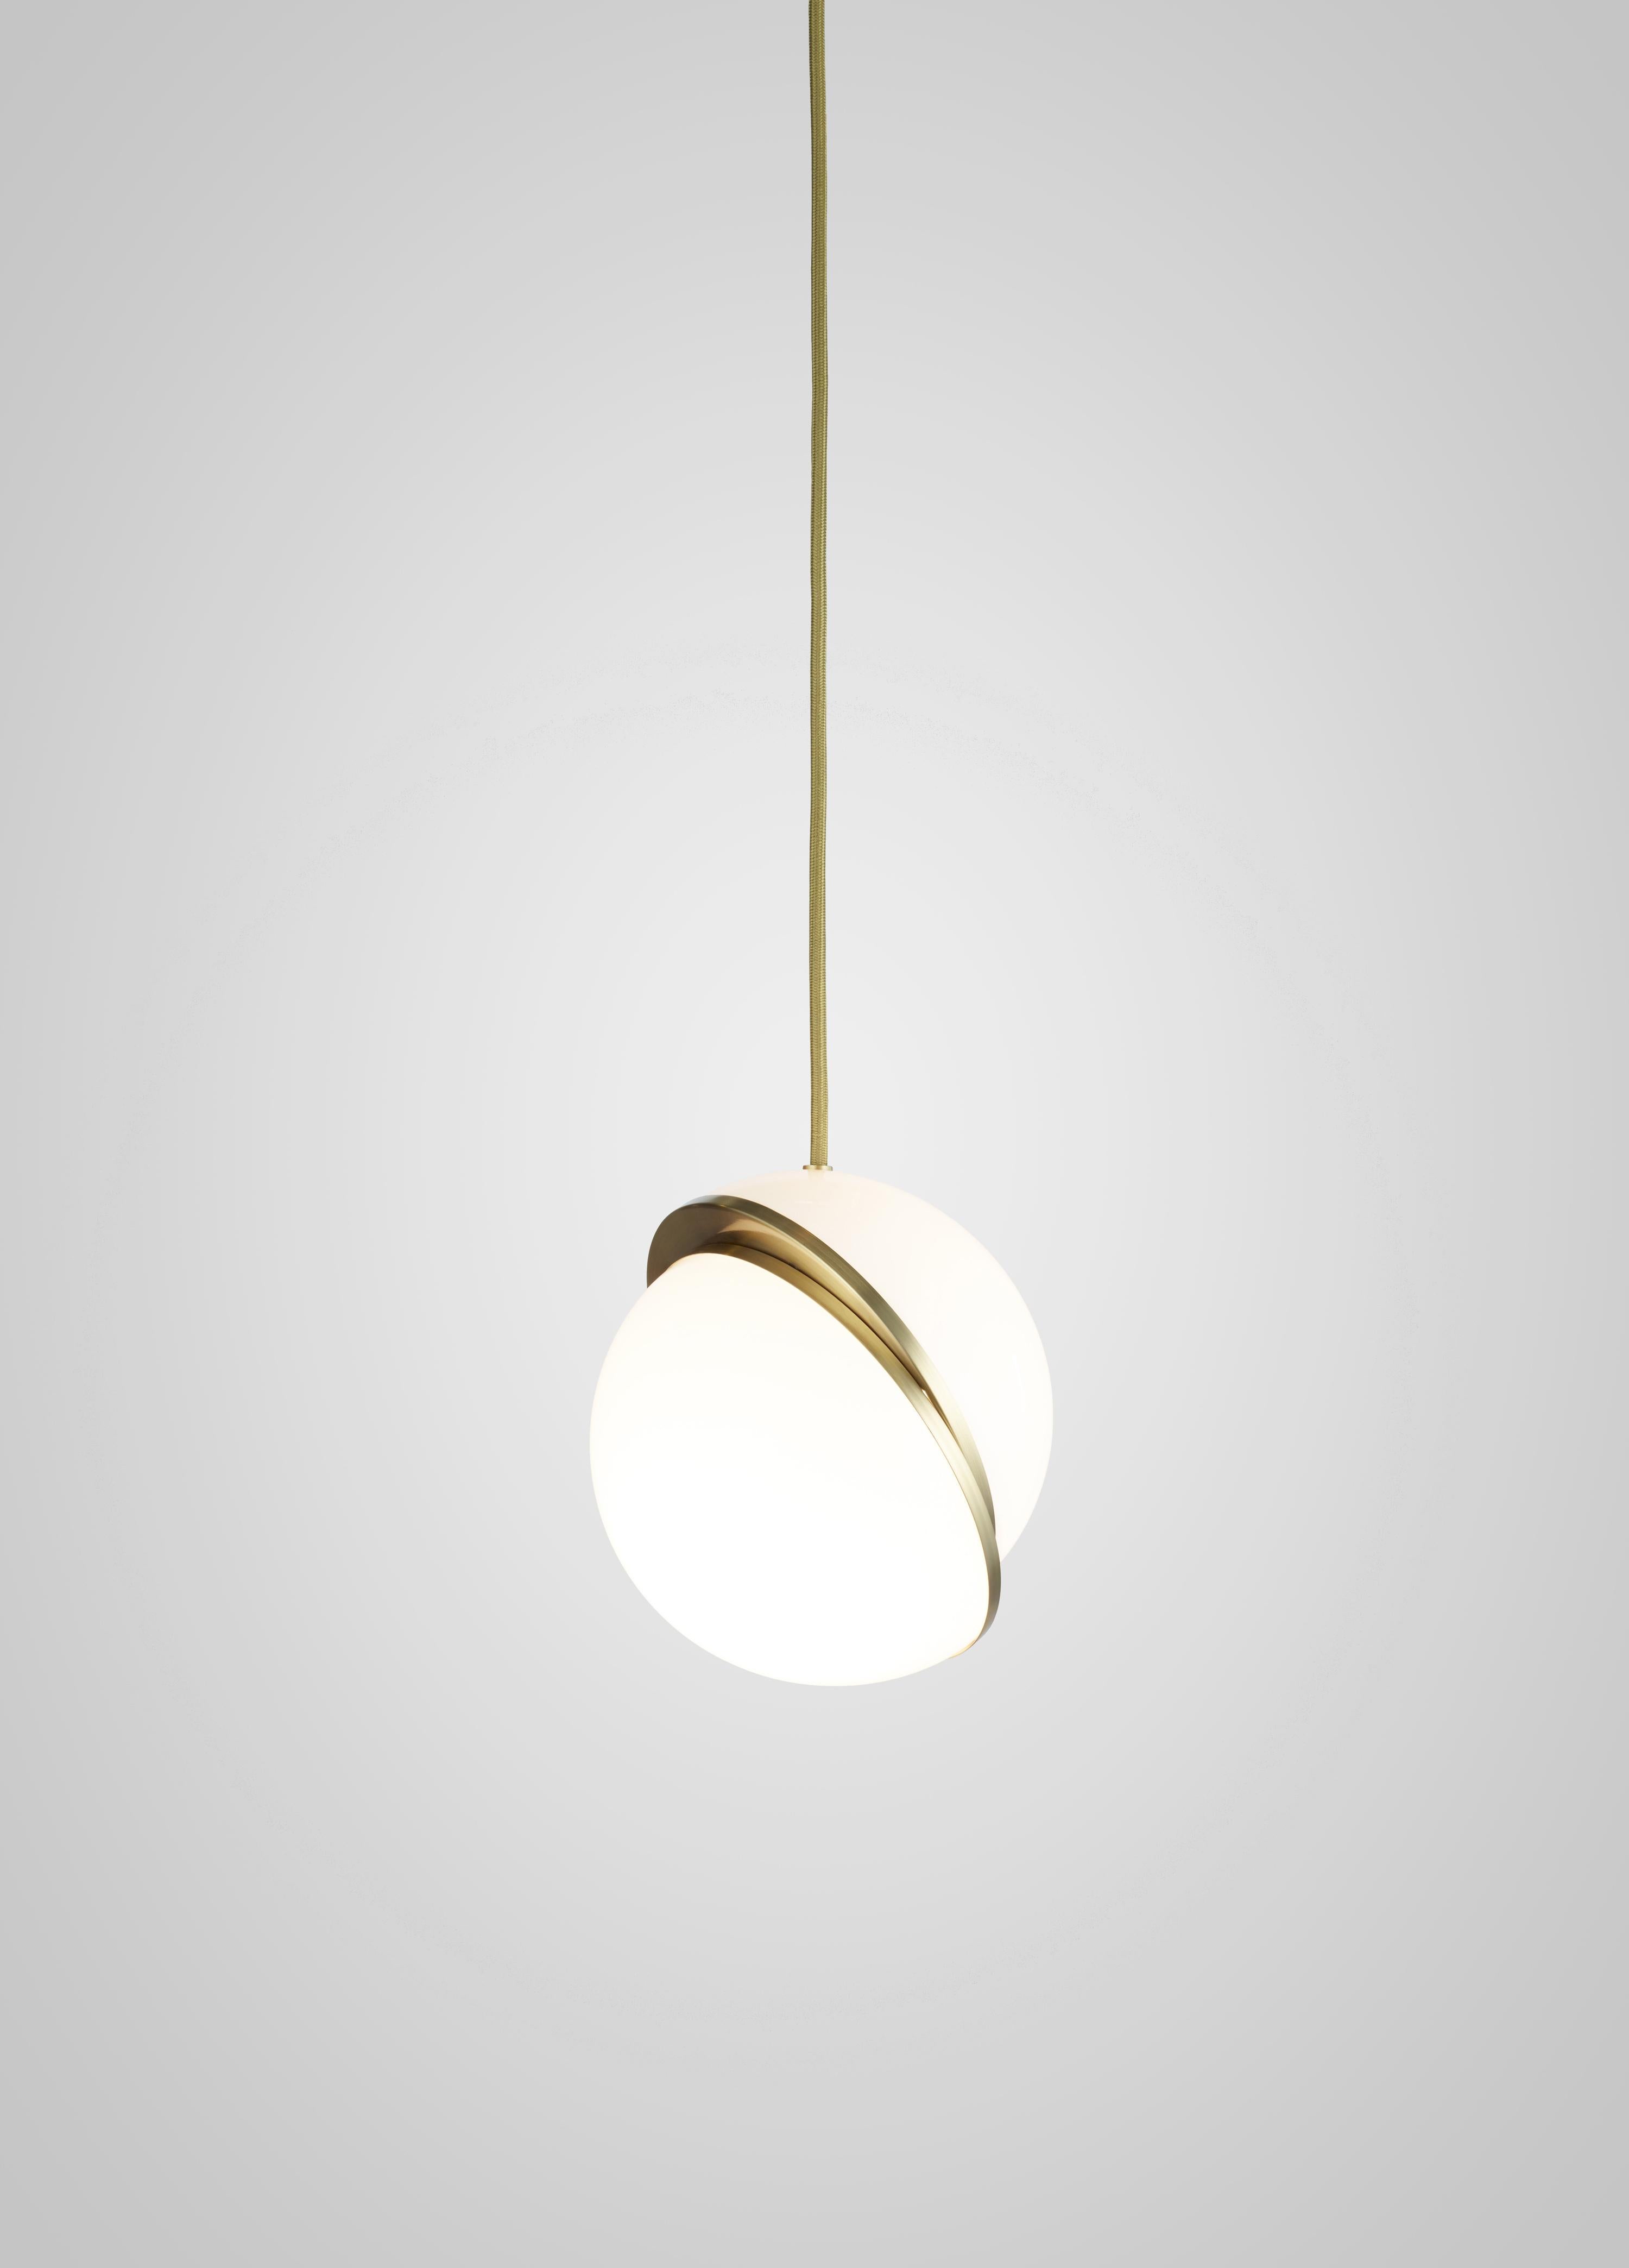 A miniature version of the popular Crescent Light, this illuminated sphere is sliced asymmetrically in half to reveal a crescent-shaped brushed brass fascia. ­The Mini Crescent Light seamlessly combines the solid and the opaque. Also available as a